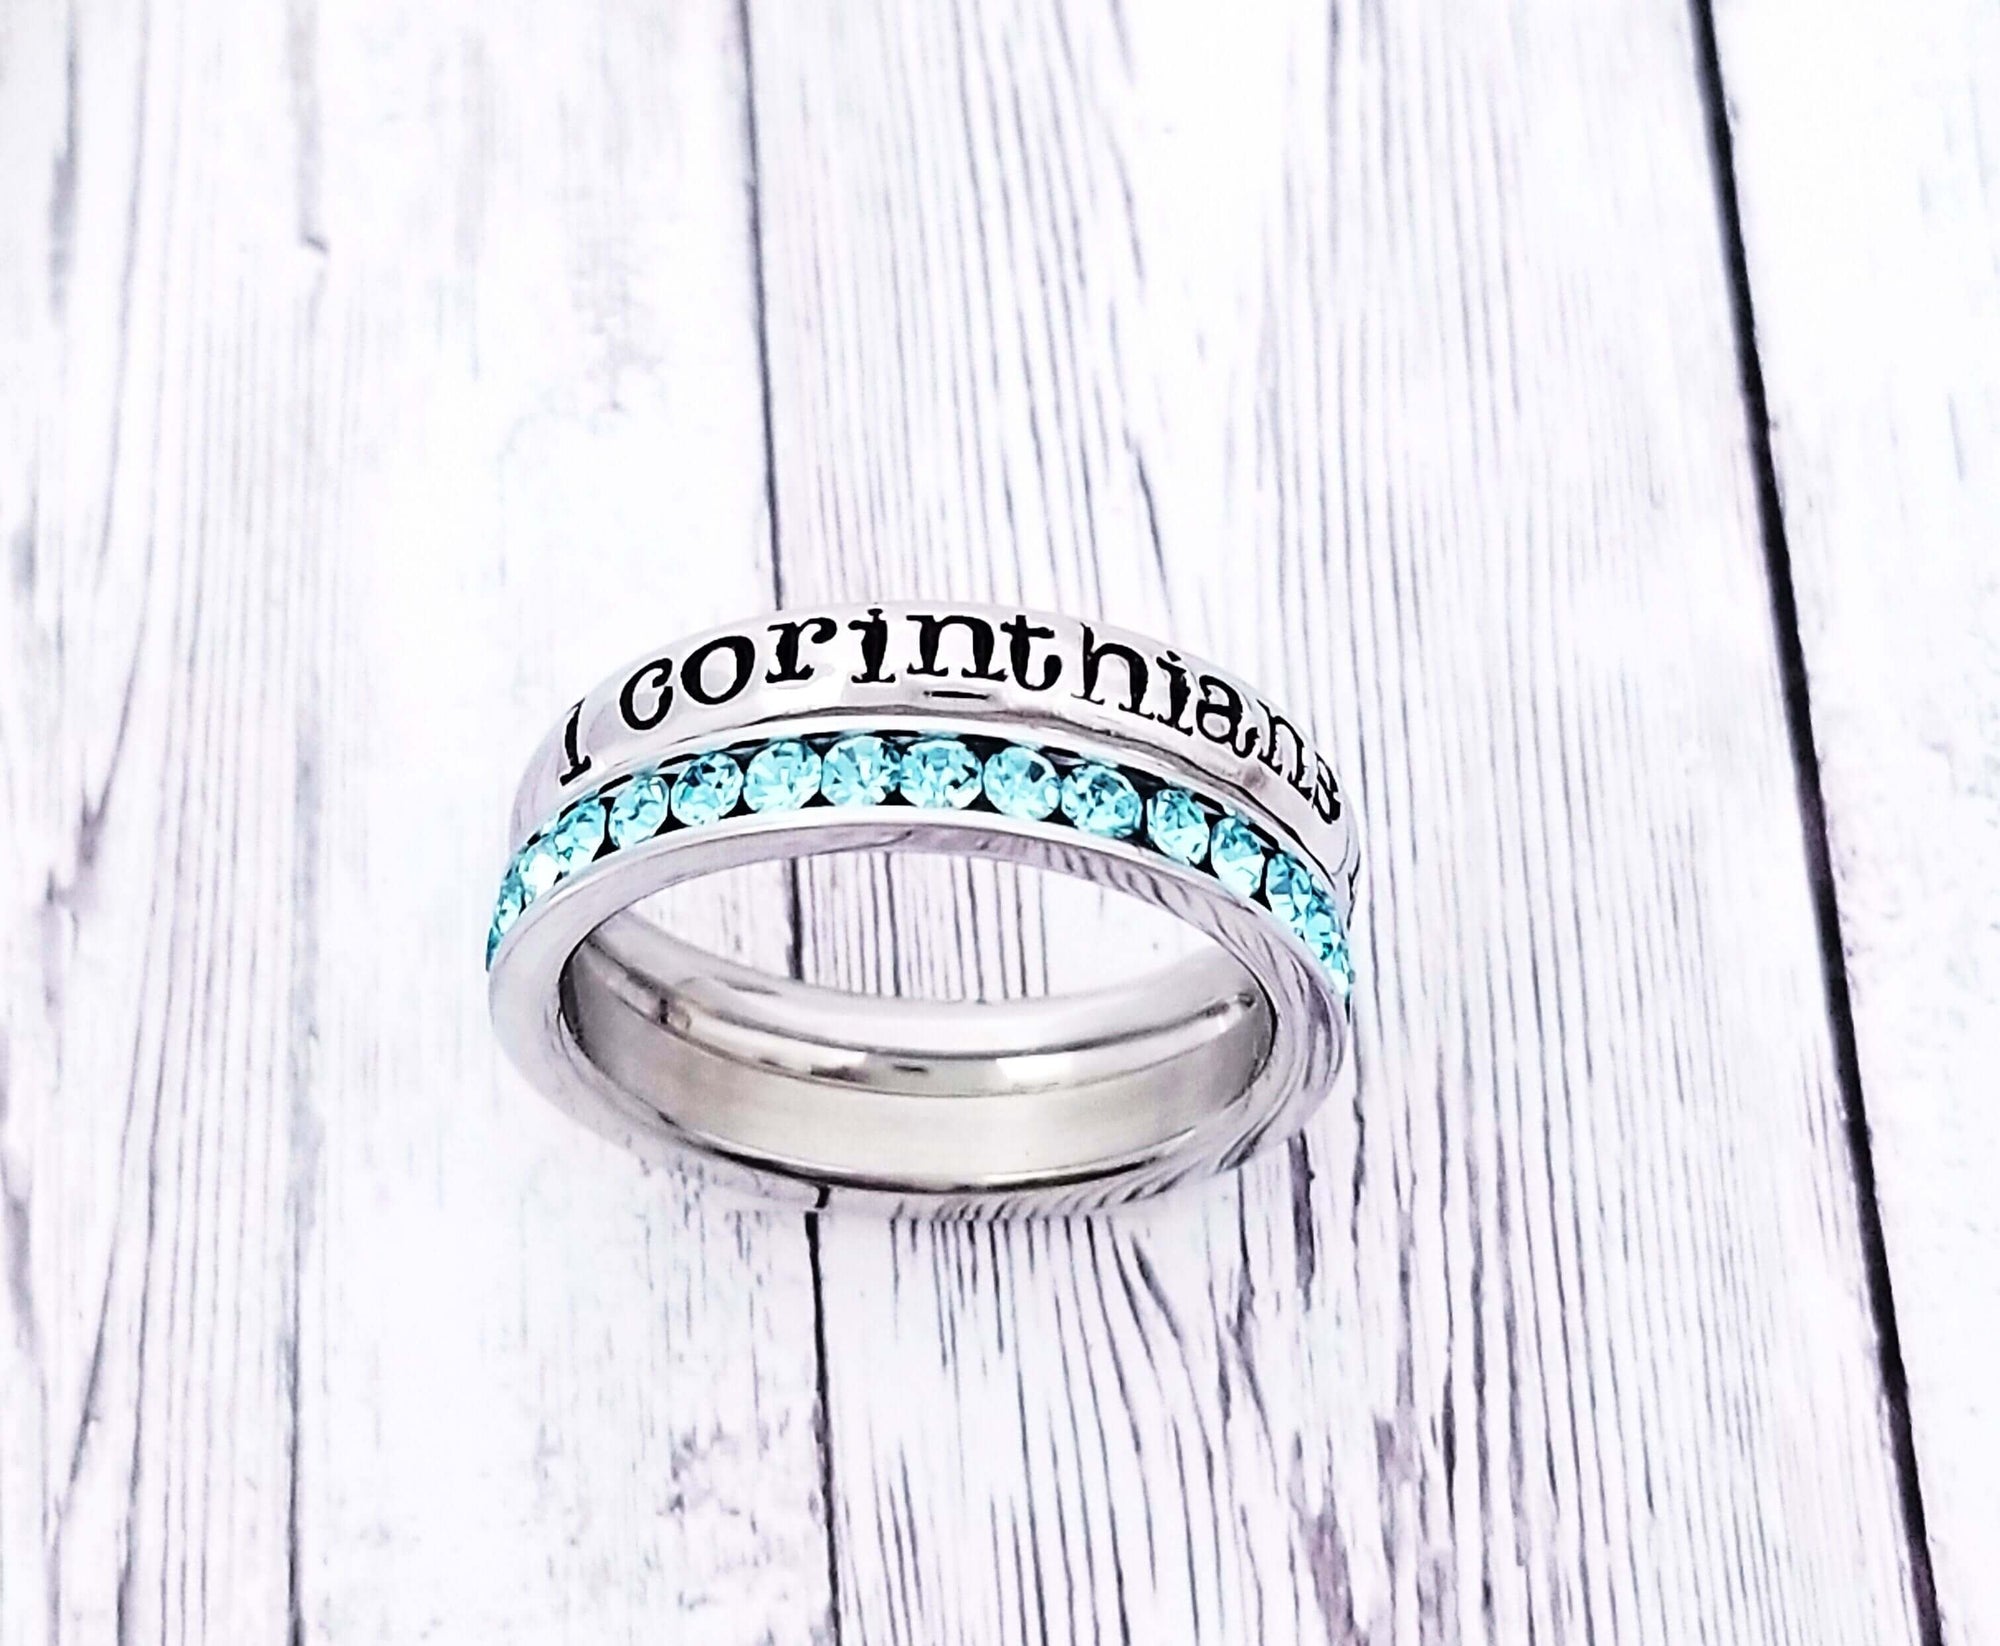 Corinthians Ring, Scripture Ring, Christian Jewelry, Psalm Ring, Scripture Jewelry, Inspirational Ring, Personalize Jewelry, Hand Stamped Ring, Stackable Ring